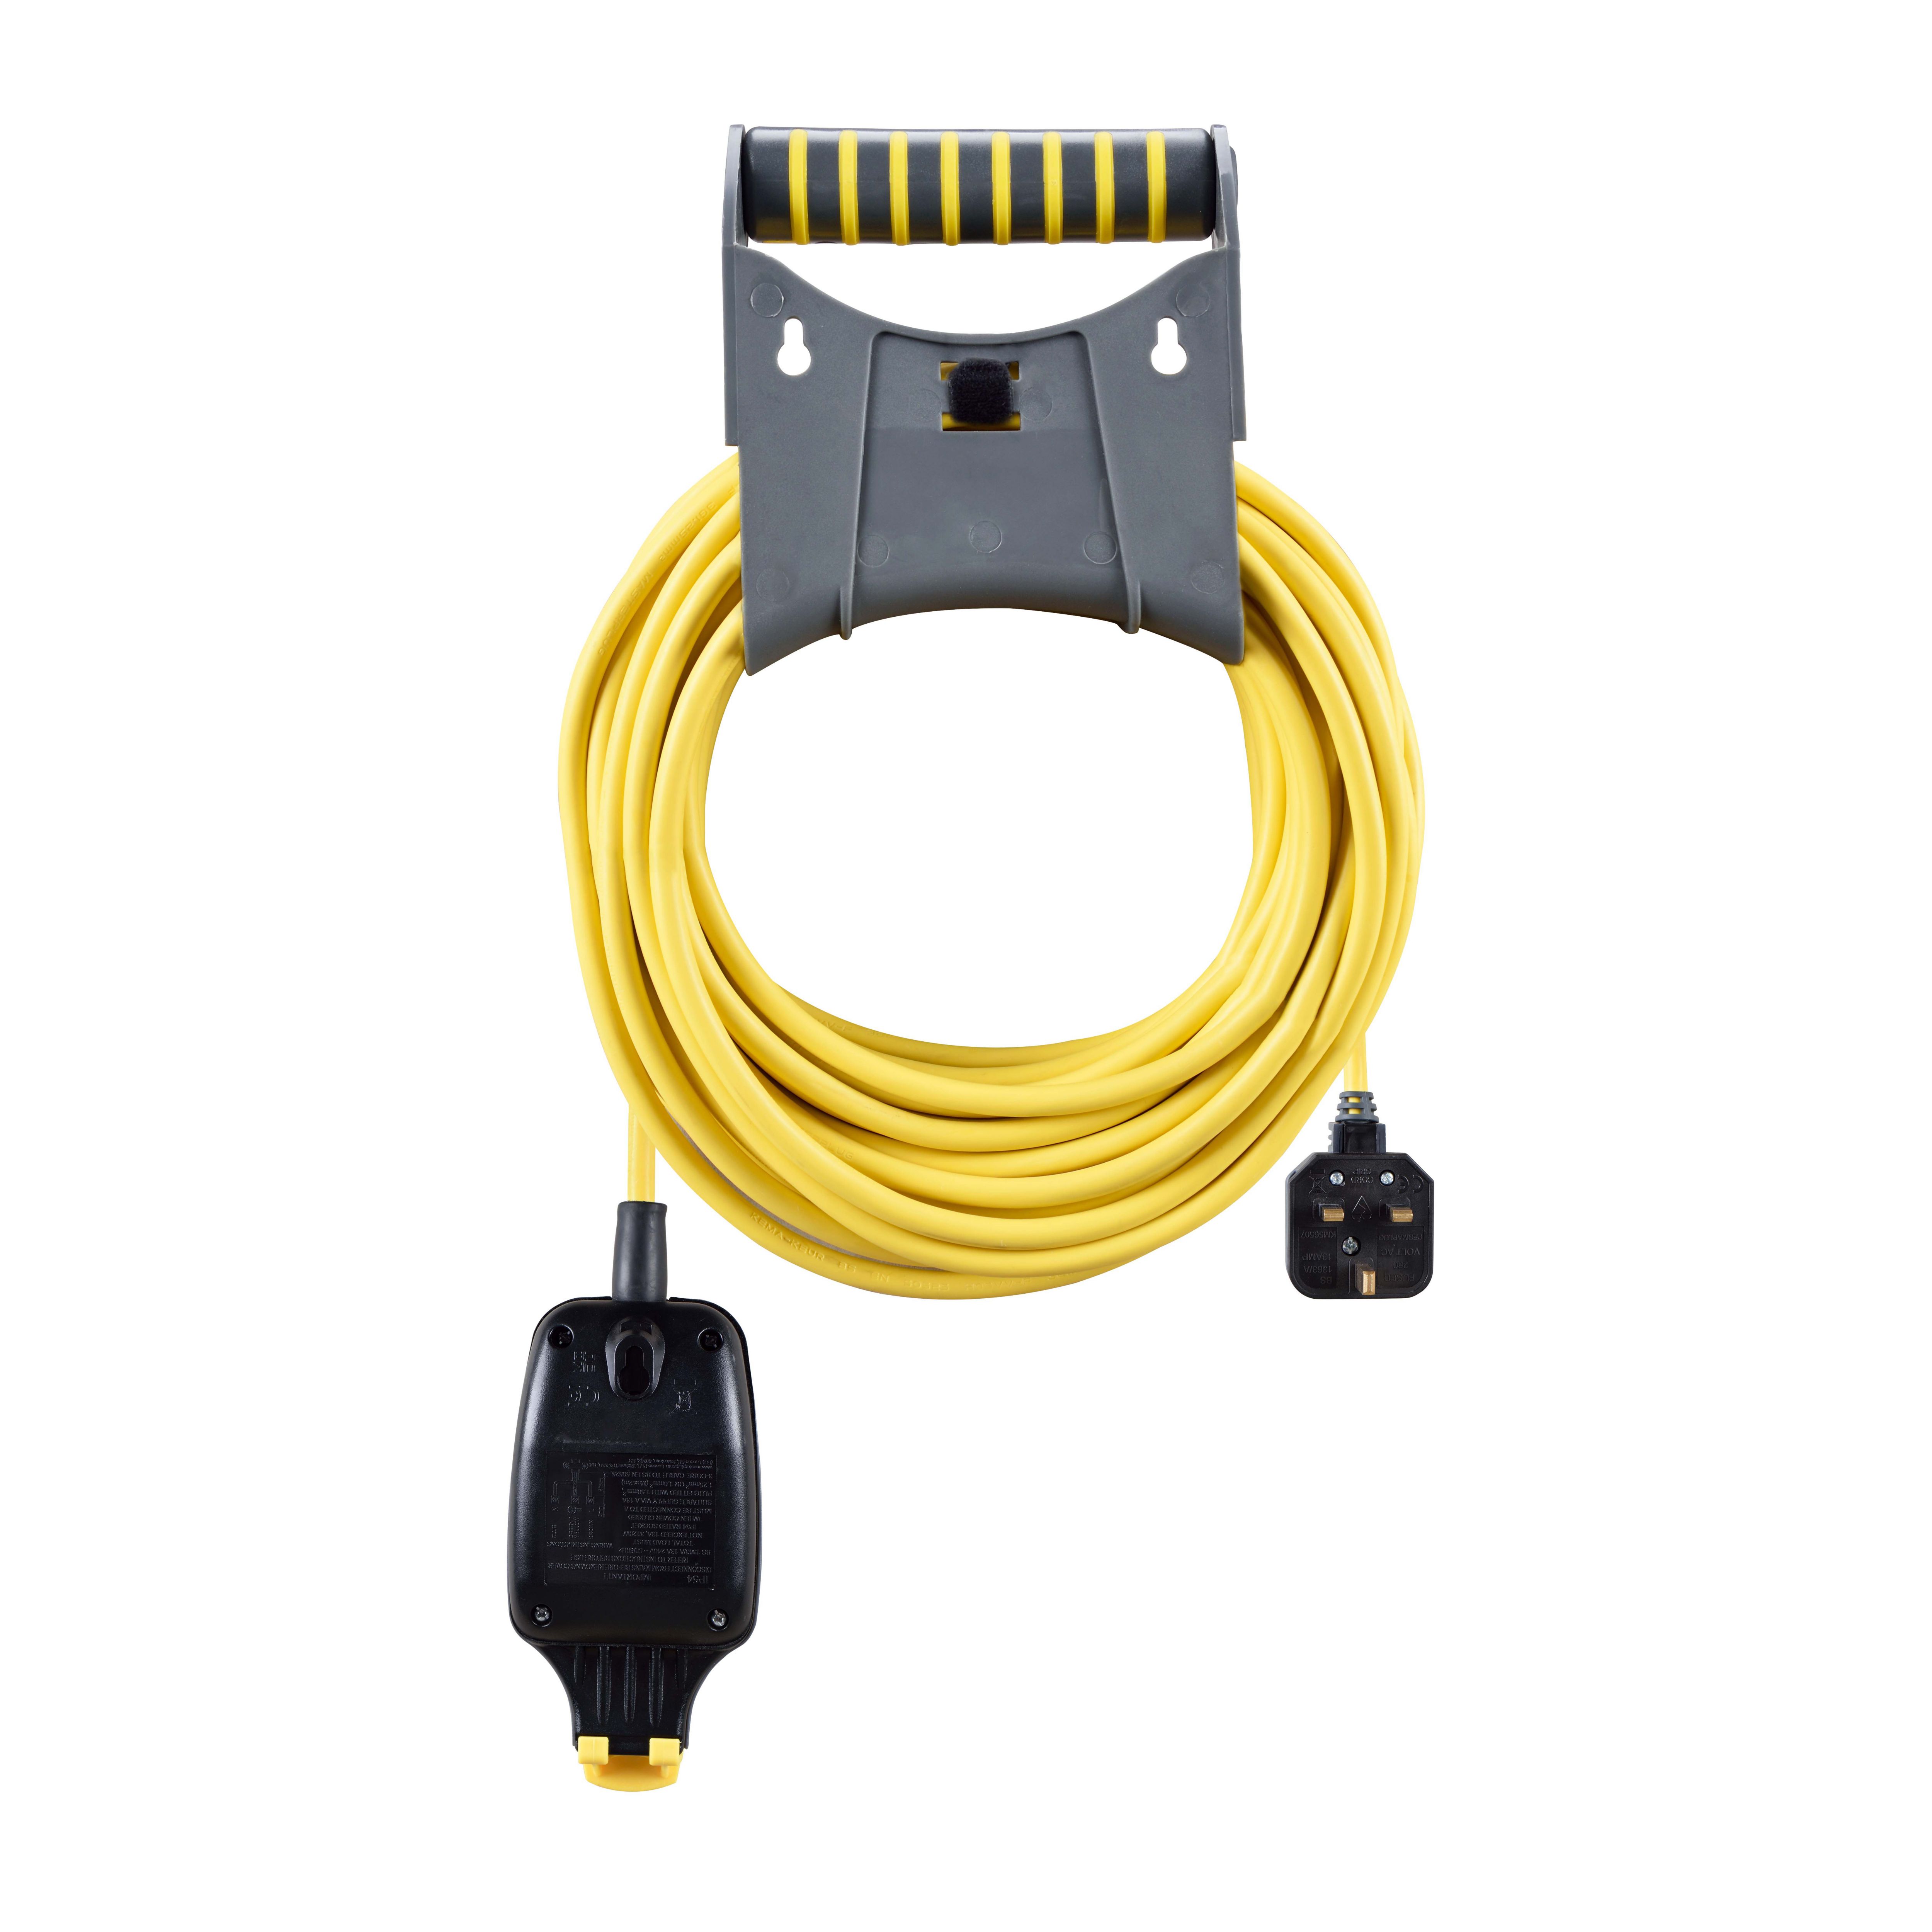 Masterplug EXU1513/1IPY/CHT-BD IP54 Rated 1 socket 13A Grey & yellow Extension lead, 15m